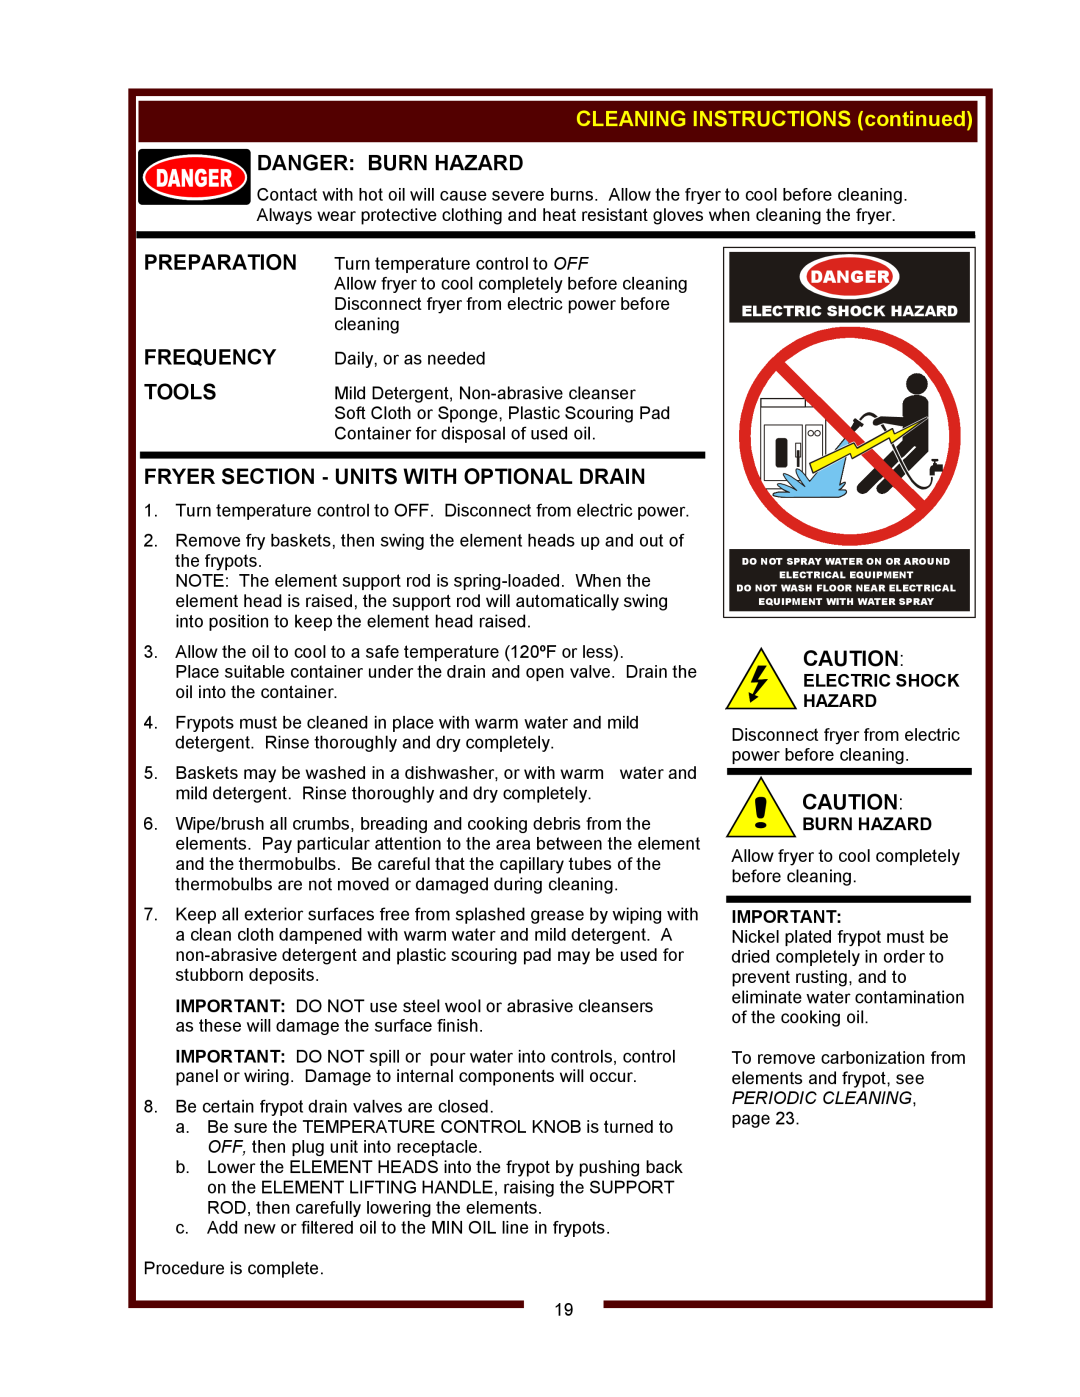 Wells WVF-886 CLEANING INSTRUCTIONS continued, Fryer Section - Units With Optional Drain, Danger Burn Hazard, Preparation 